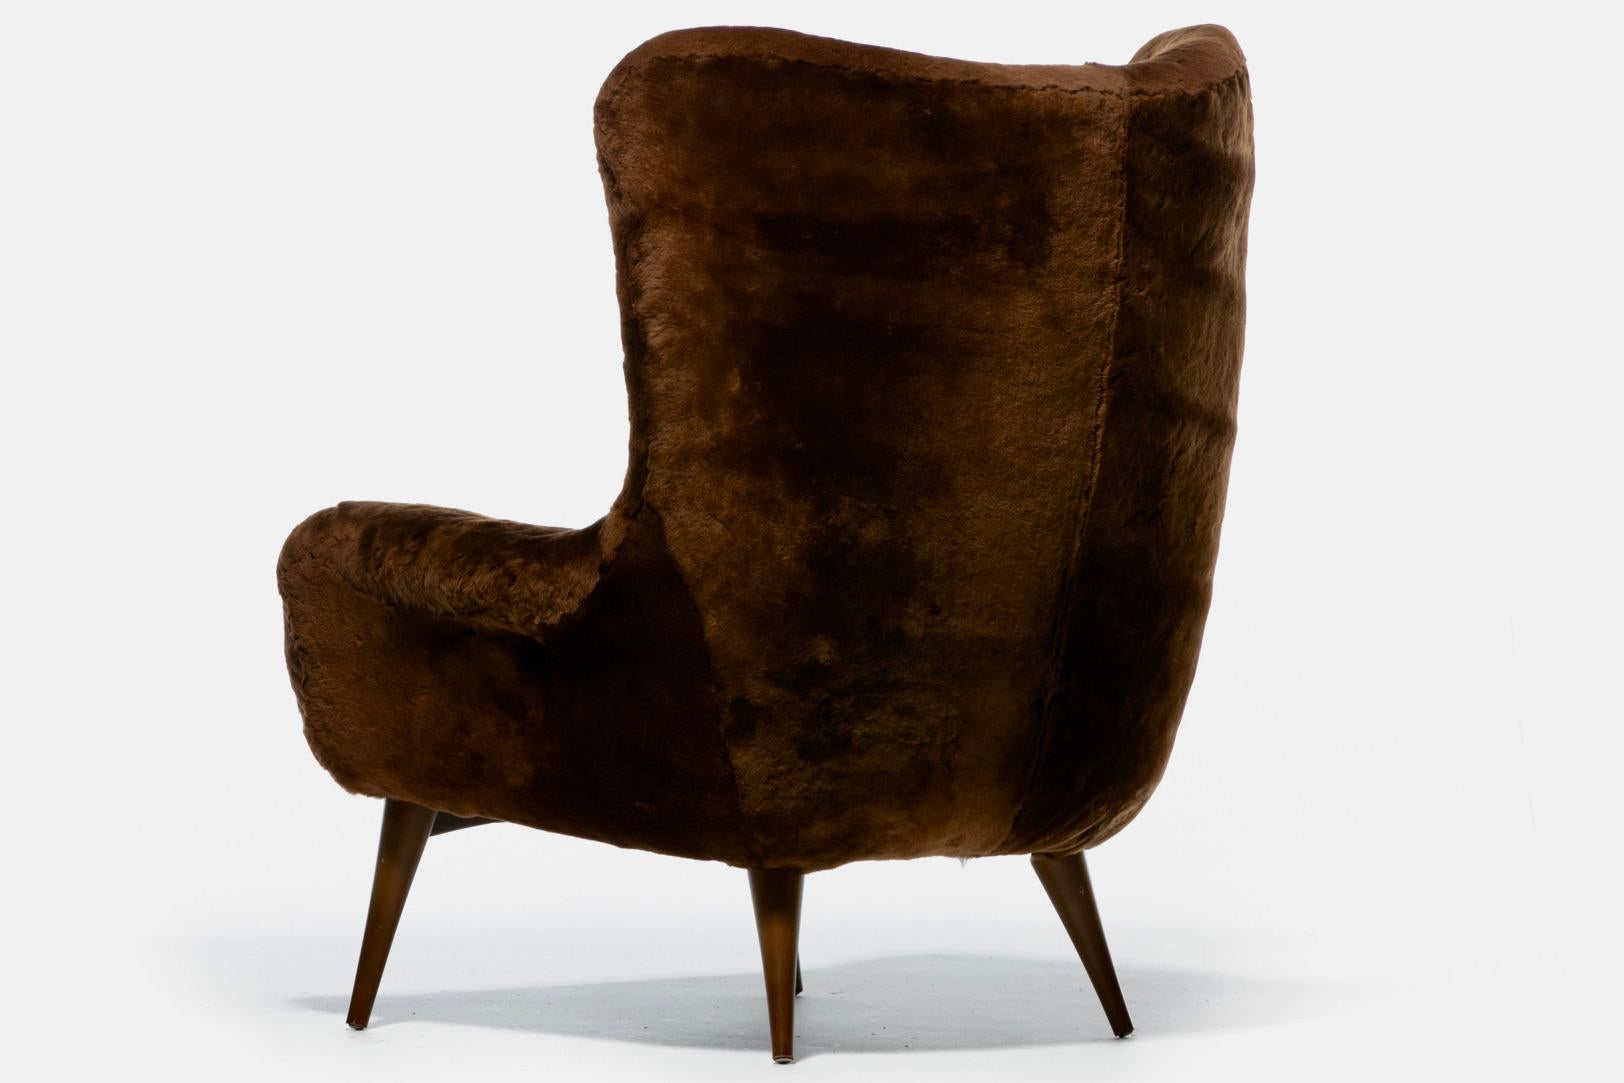 Karpen Wingback Chairs in Luxuriously Soft Milk Chocolate Shearling, circa 1950s For Sale 2